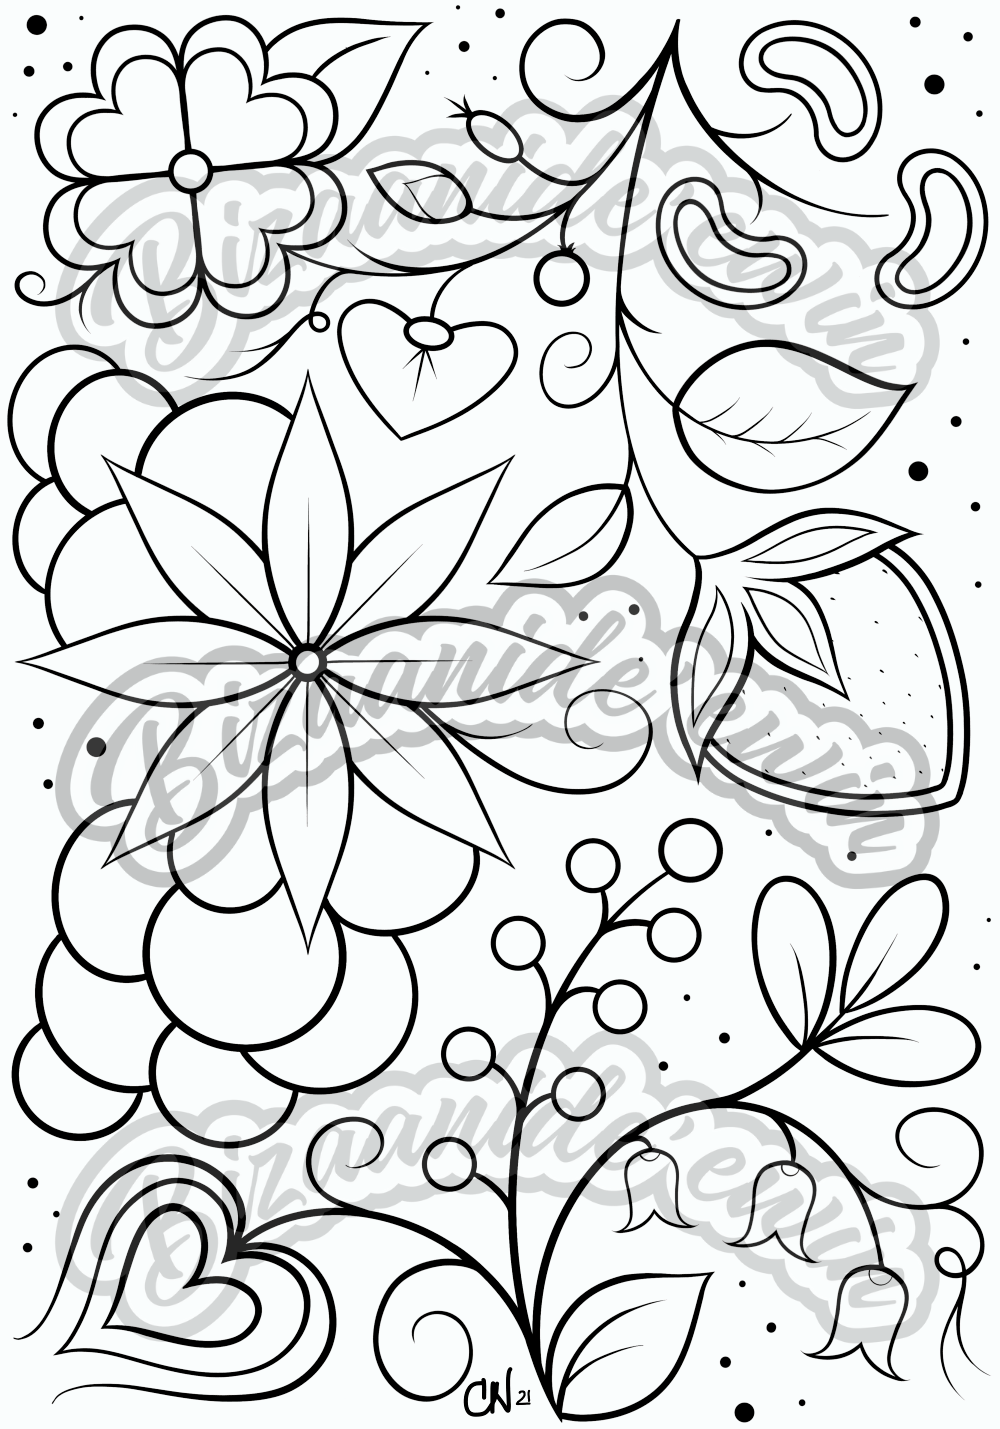 10 Black Woman Coloring Pages, African American Coloring Pages, Adult  Grayscale Coloring Pages Instant Download Series 5 